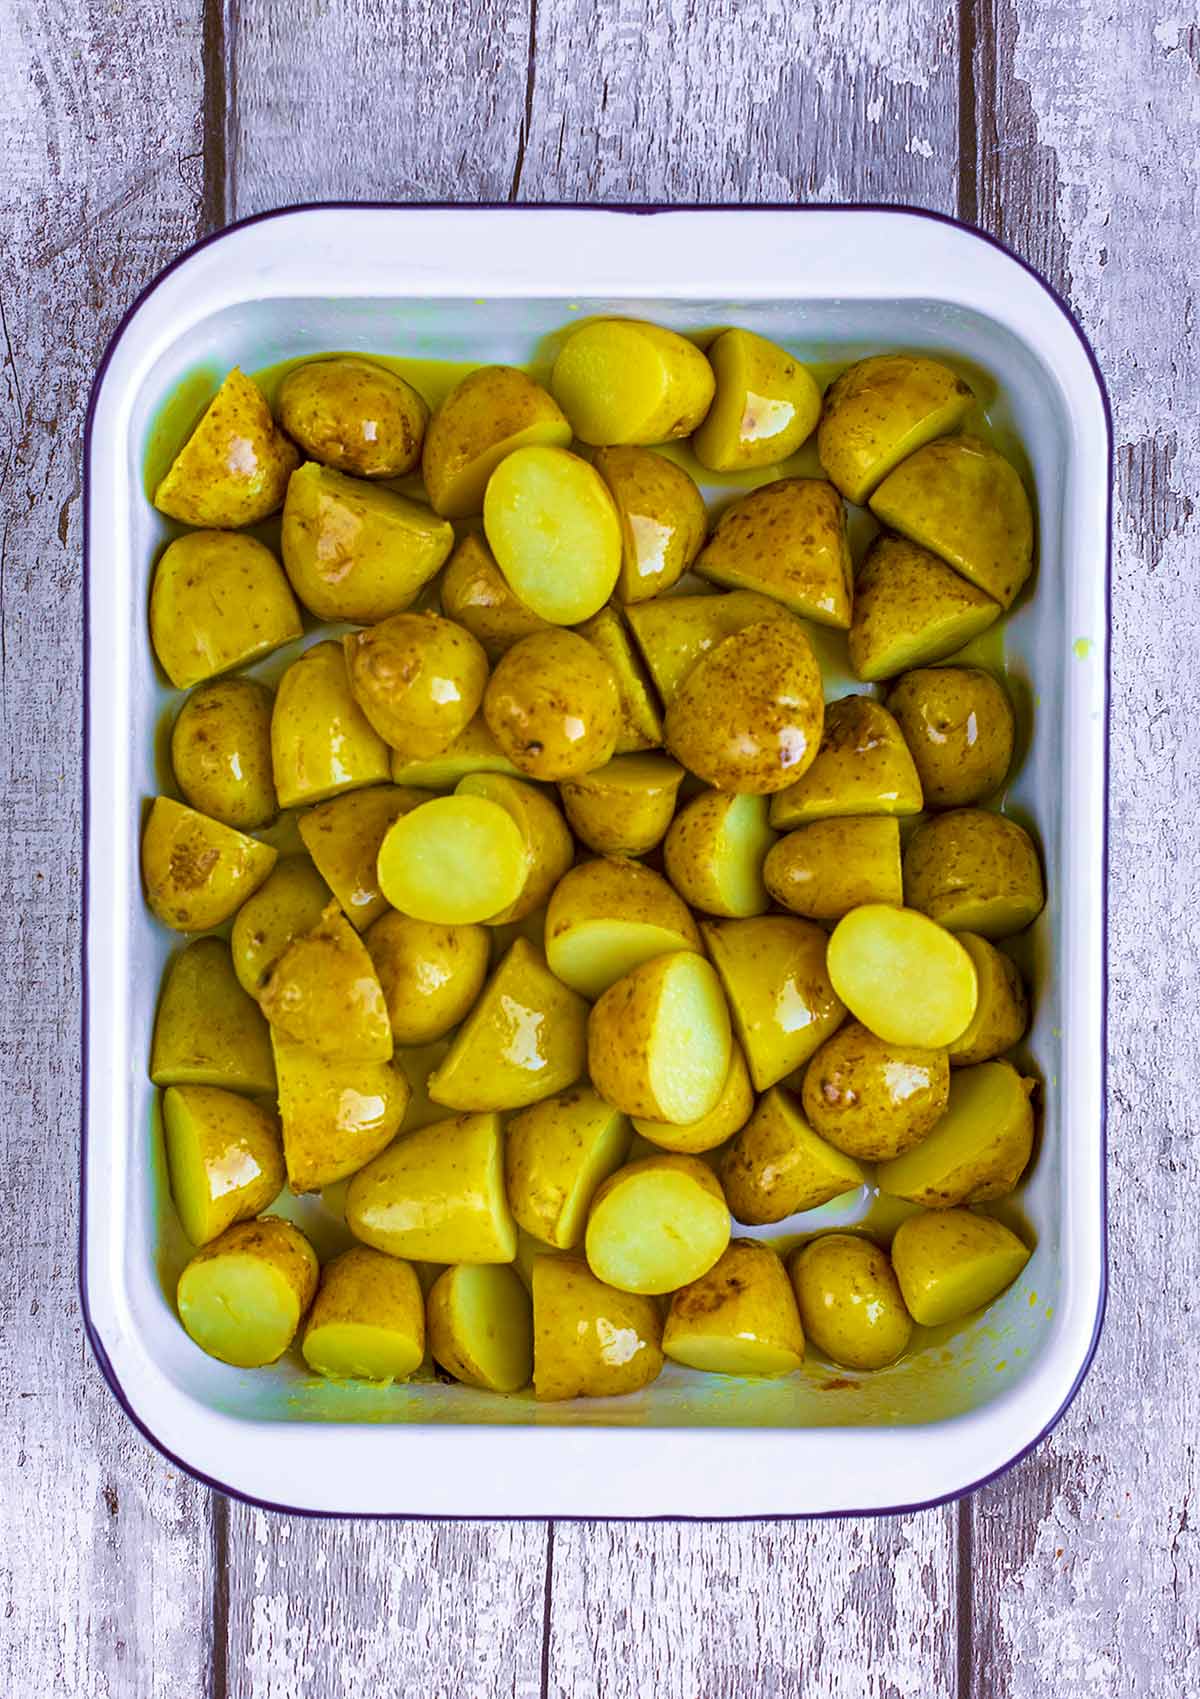 Par boiled potato halves in a baking tray with oil.